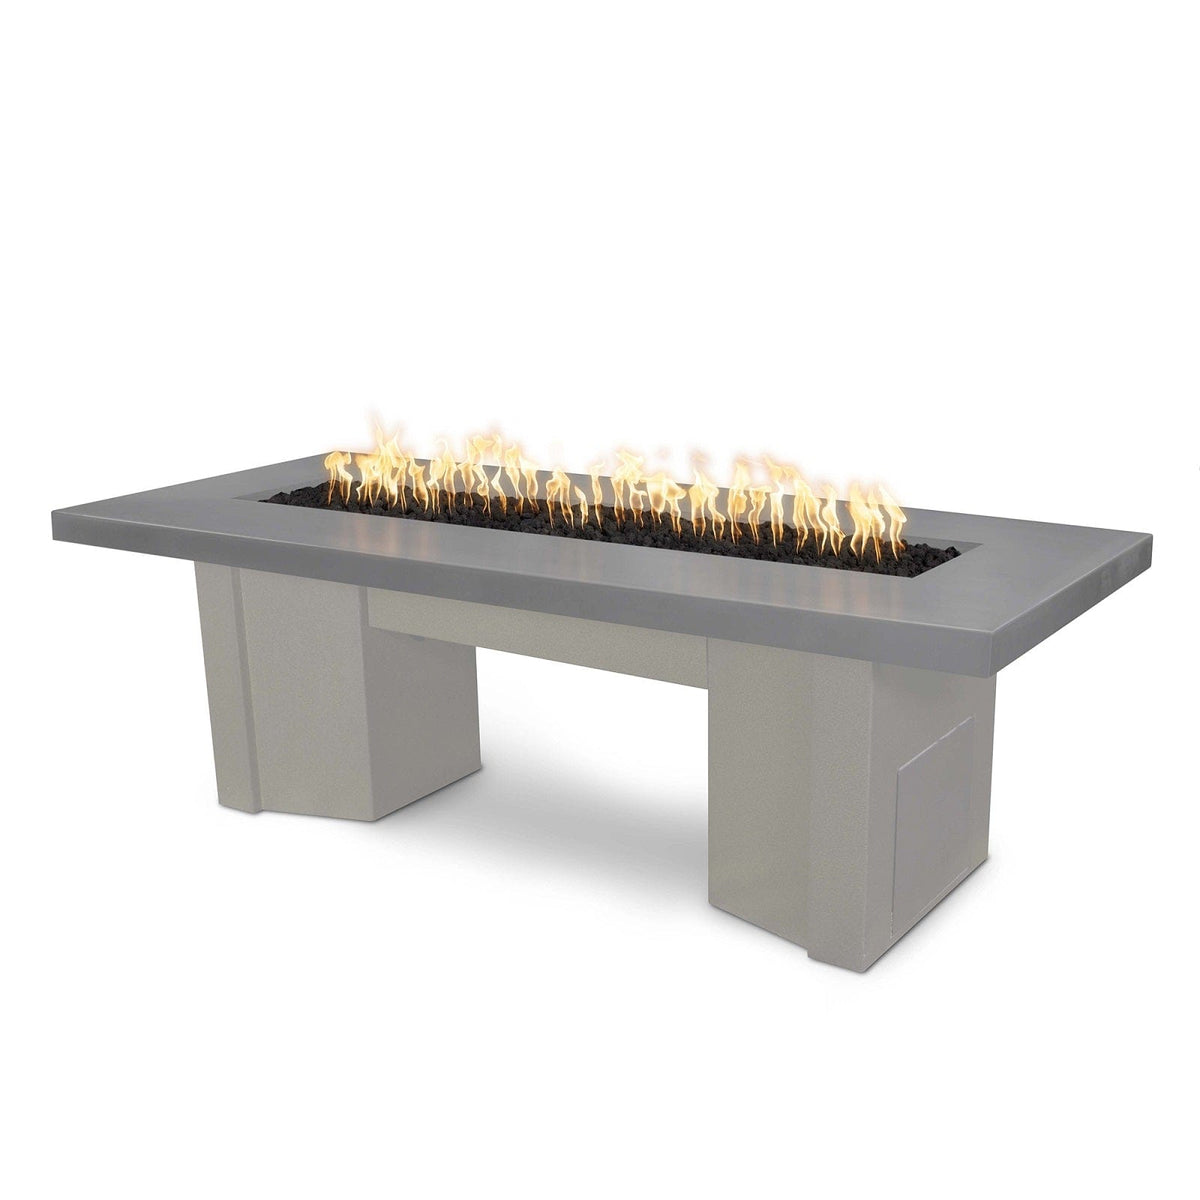 The Outdoor Plus Fire Features Natural Gray (-NGY) / Pewter Powder Coated Steel (-PEW) The Outdoor Plus 78&quot; Alameda Fire Table Smooth Concrete in Natural Gas - Flame Sense System with Push Button Spark Igniter / OPT-ALMGFRC78FSEN-NG